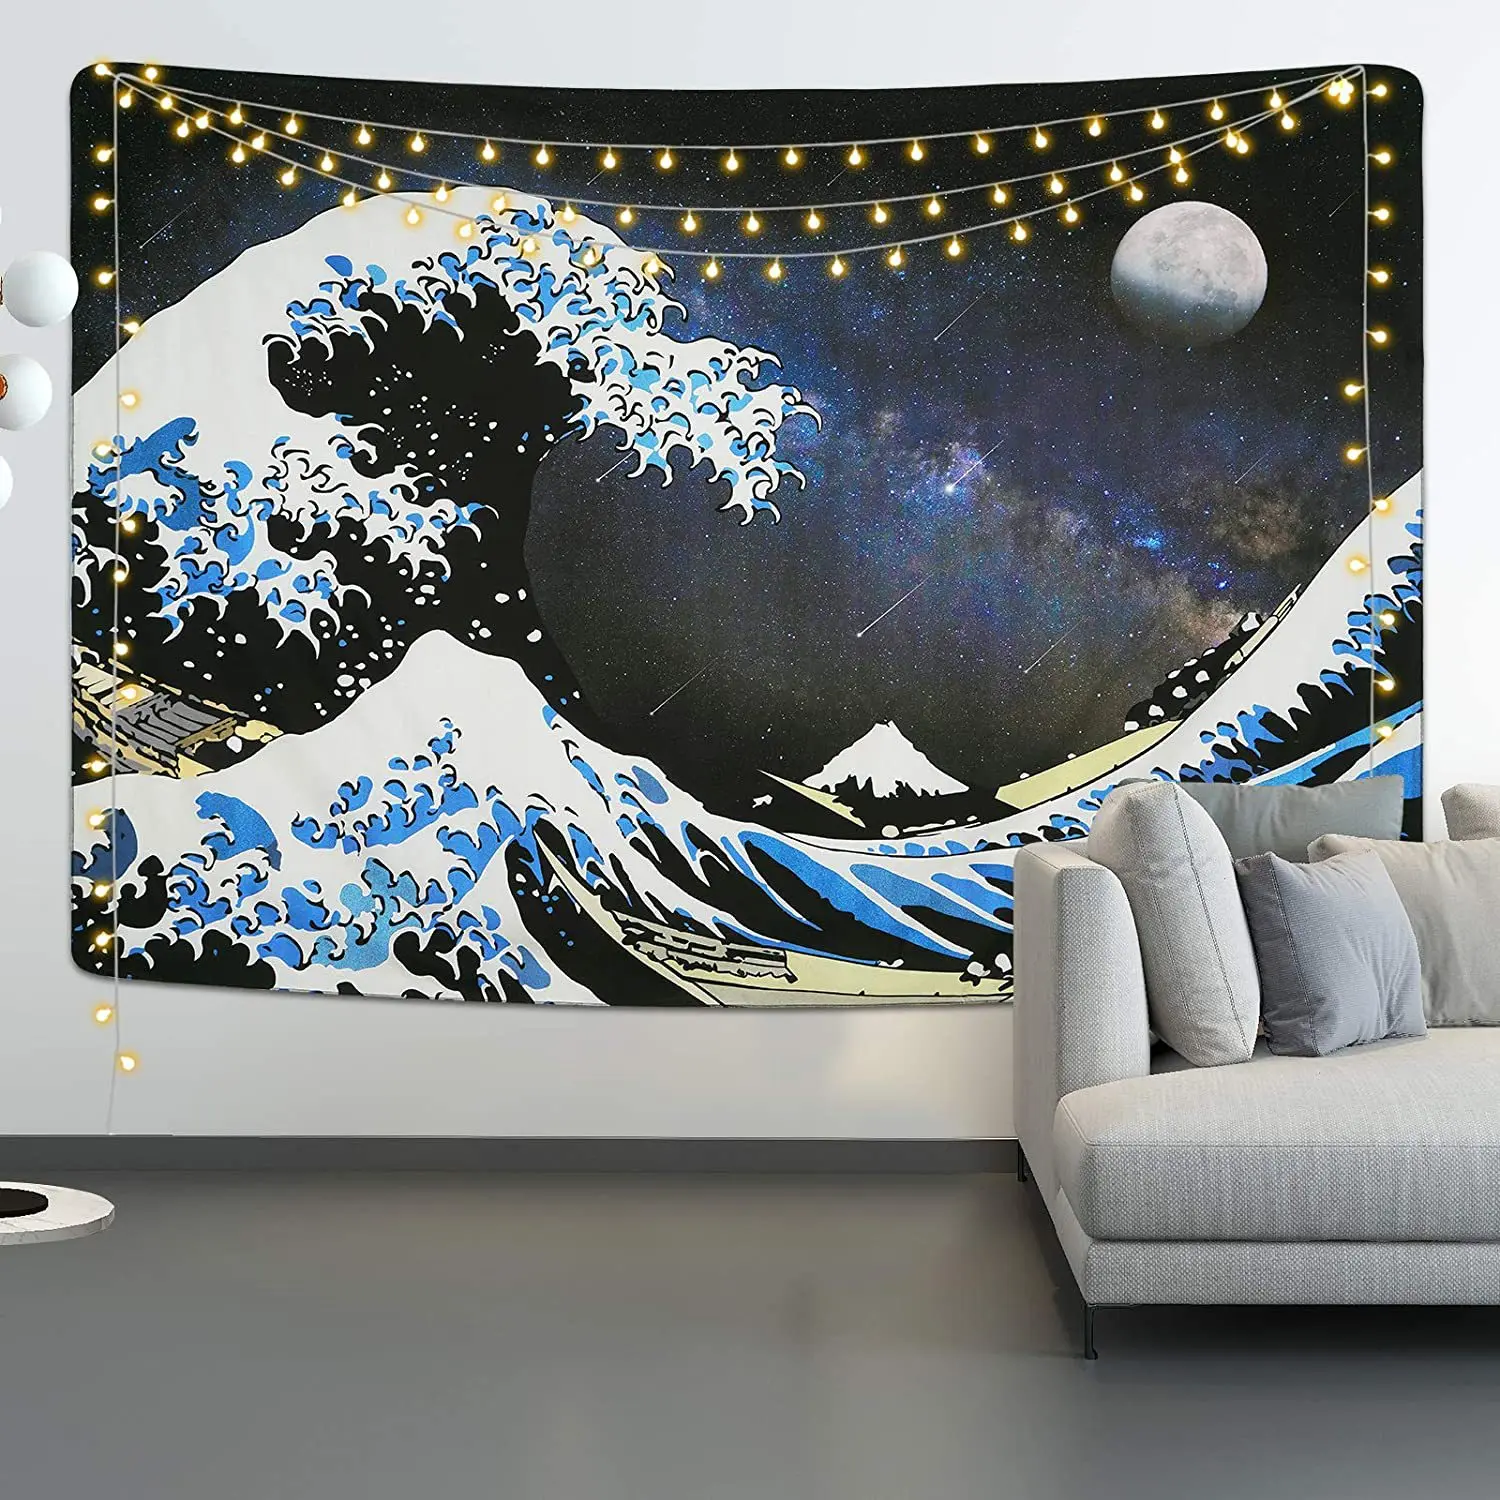 

Great Wave Tapestry Ocean Tapiz Pared Japanese Kanagawa Wall Hanging Moon Room Decor Starry Sky Home Aesthetic Bedroom Art